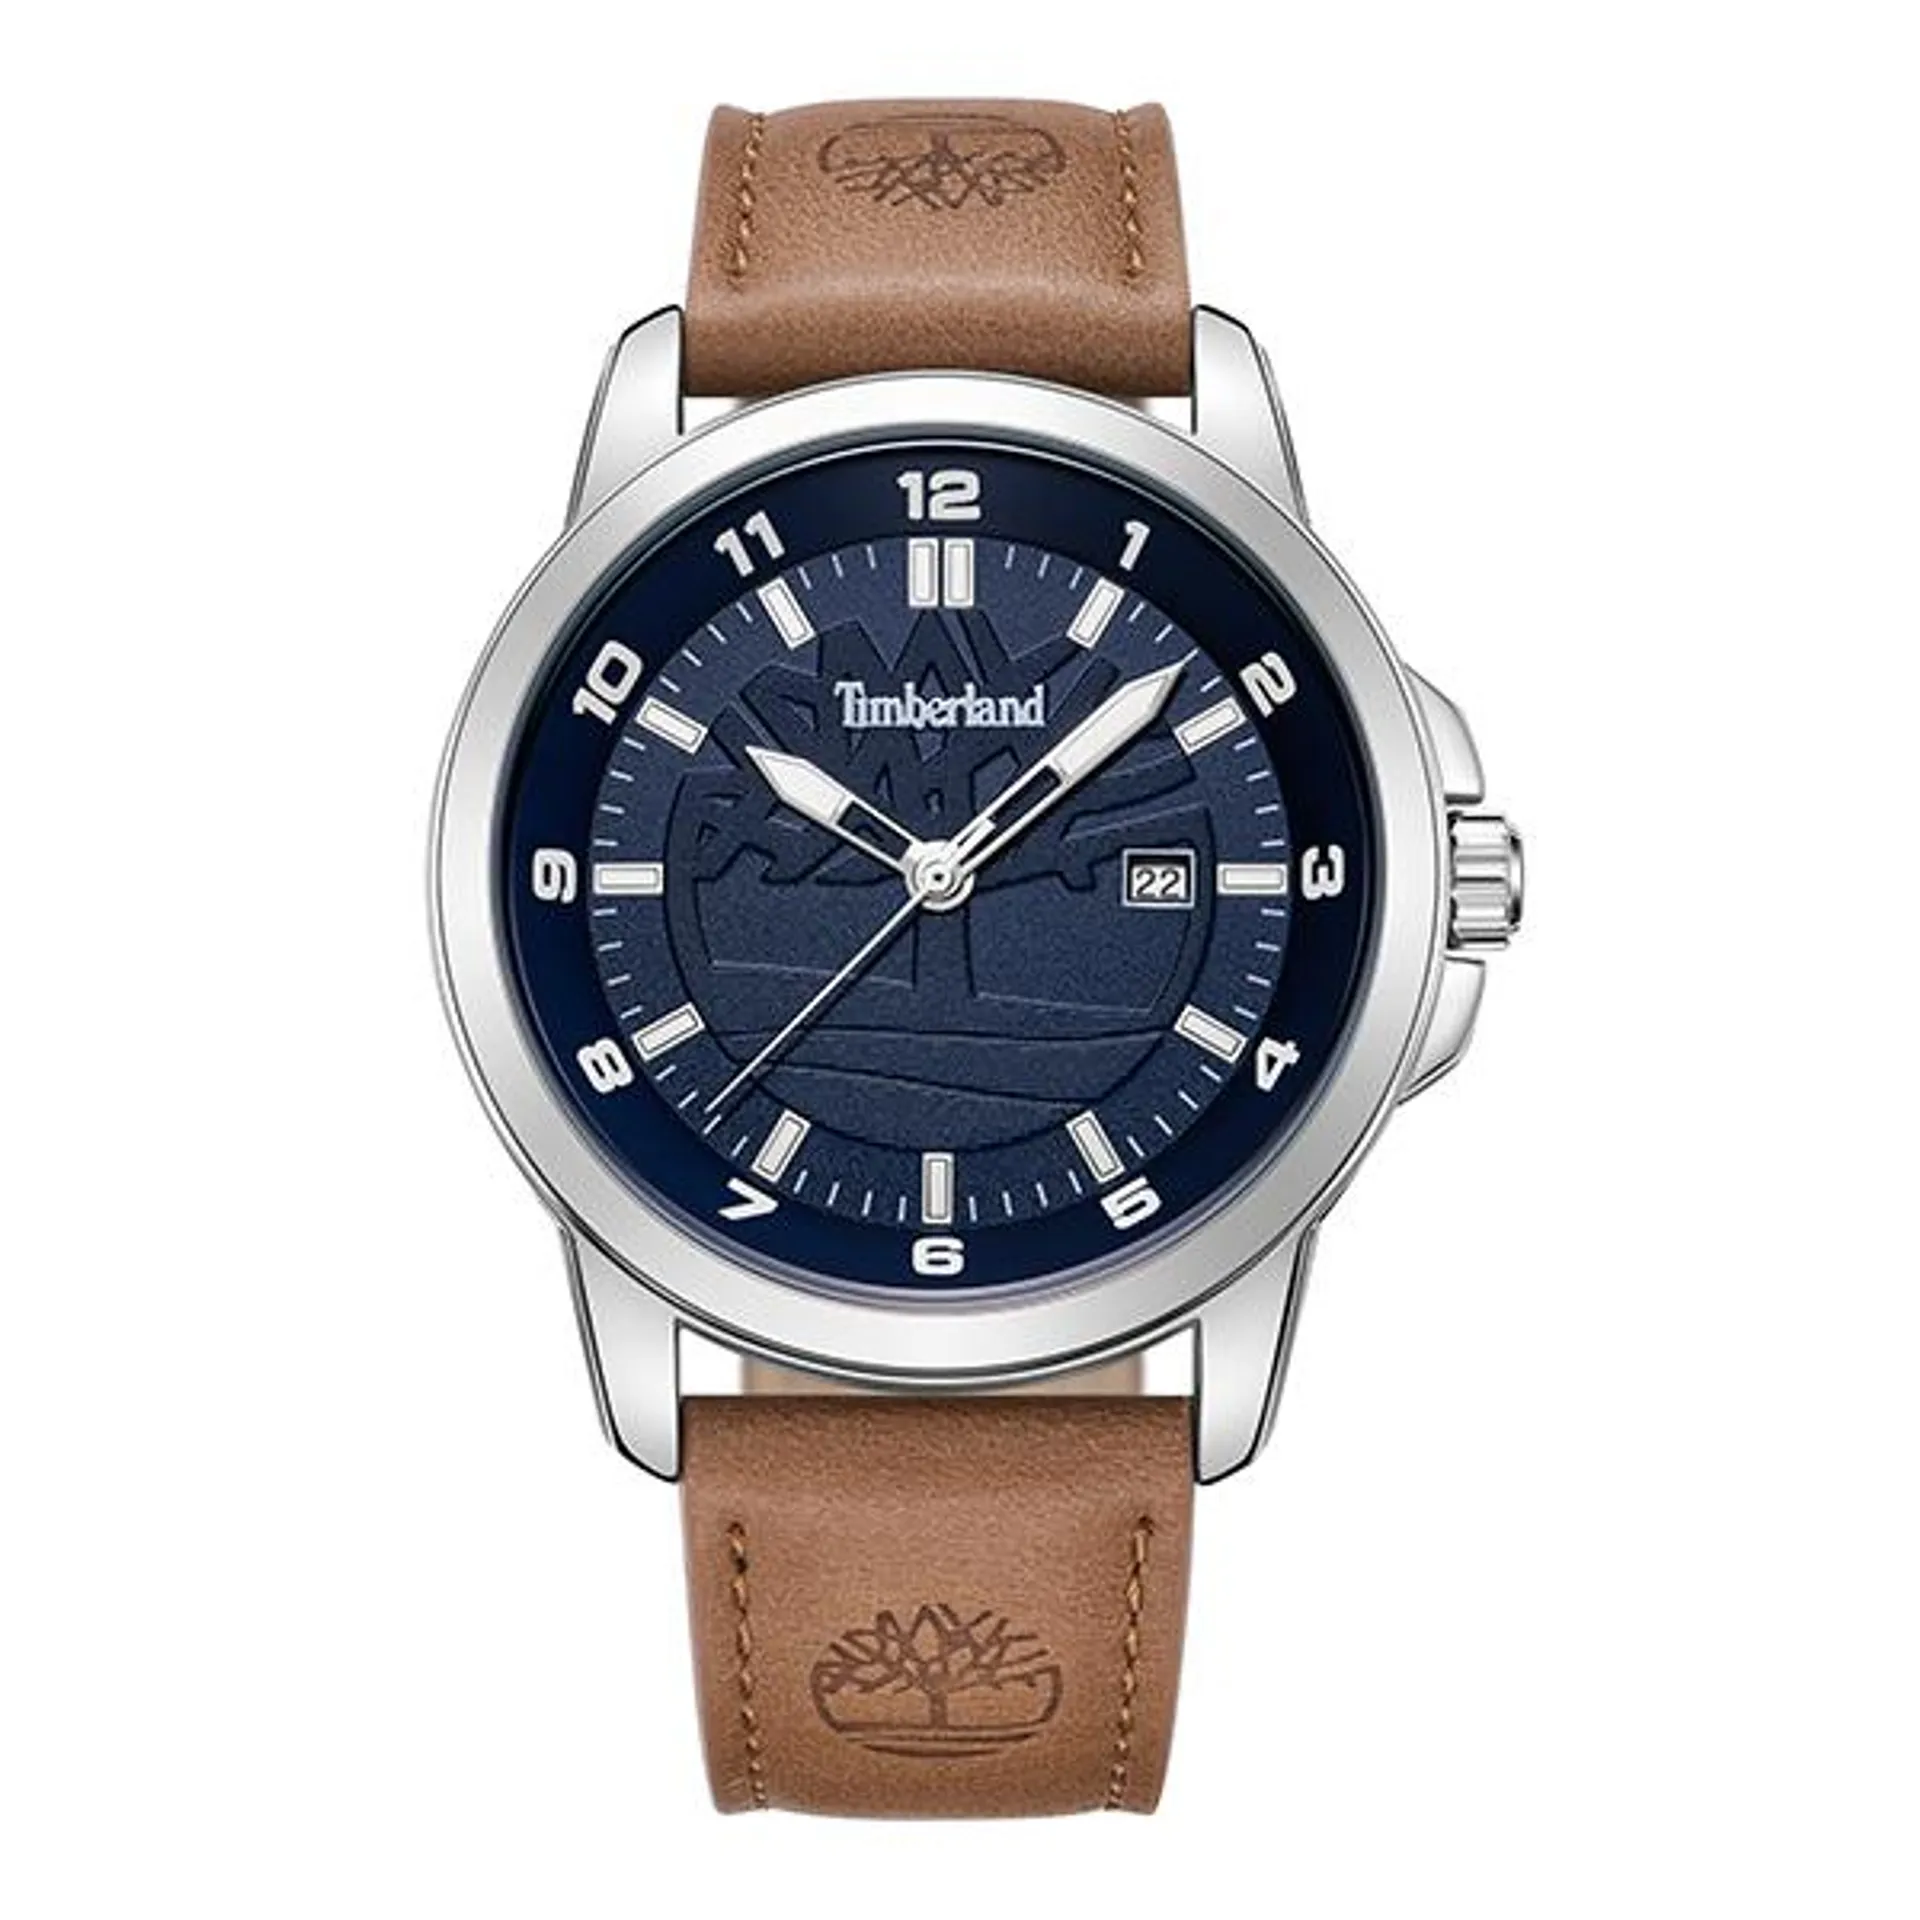 Timberland Gents Whittemore Watch with Genuine Leather Strap